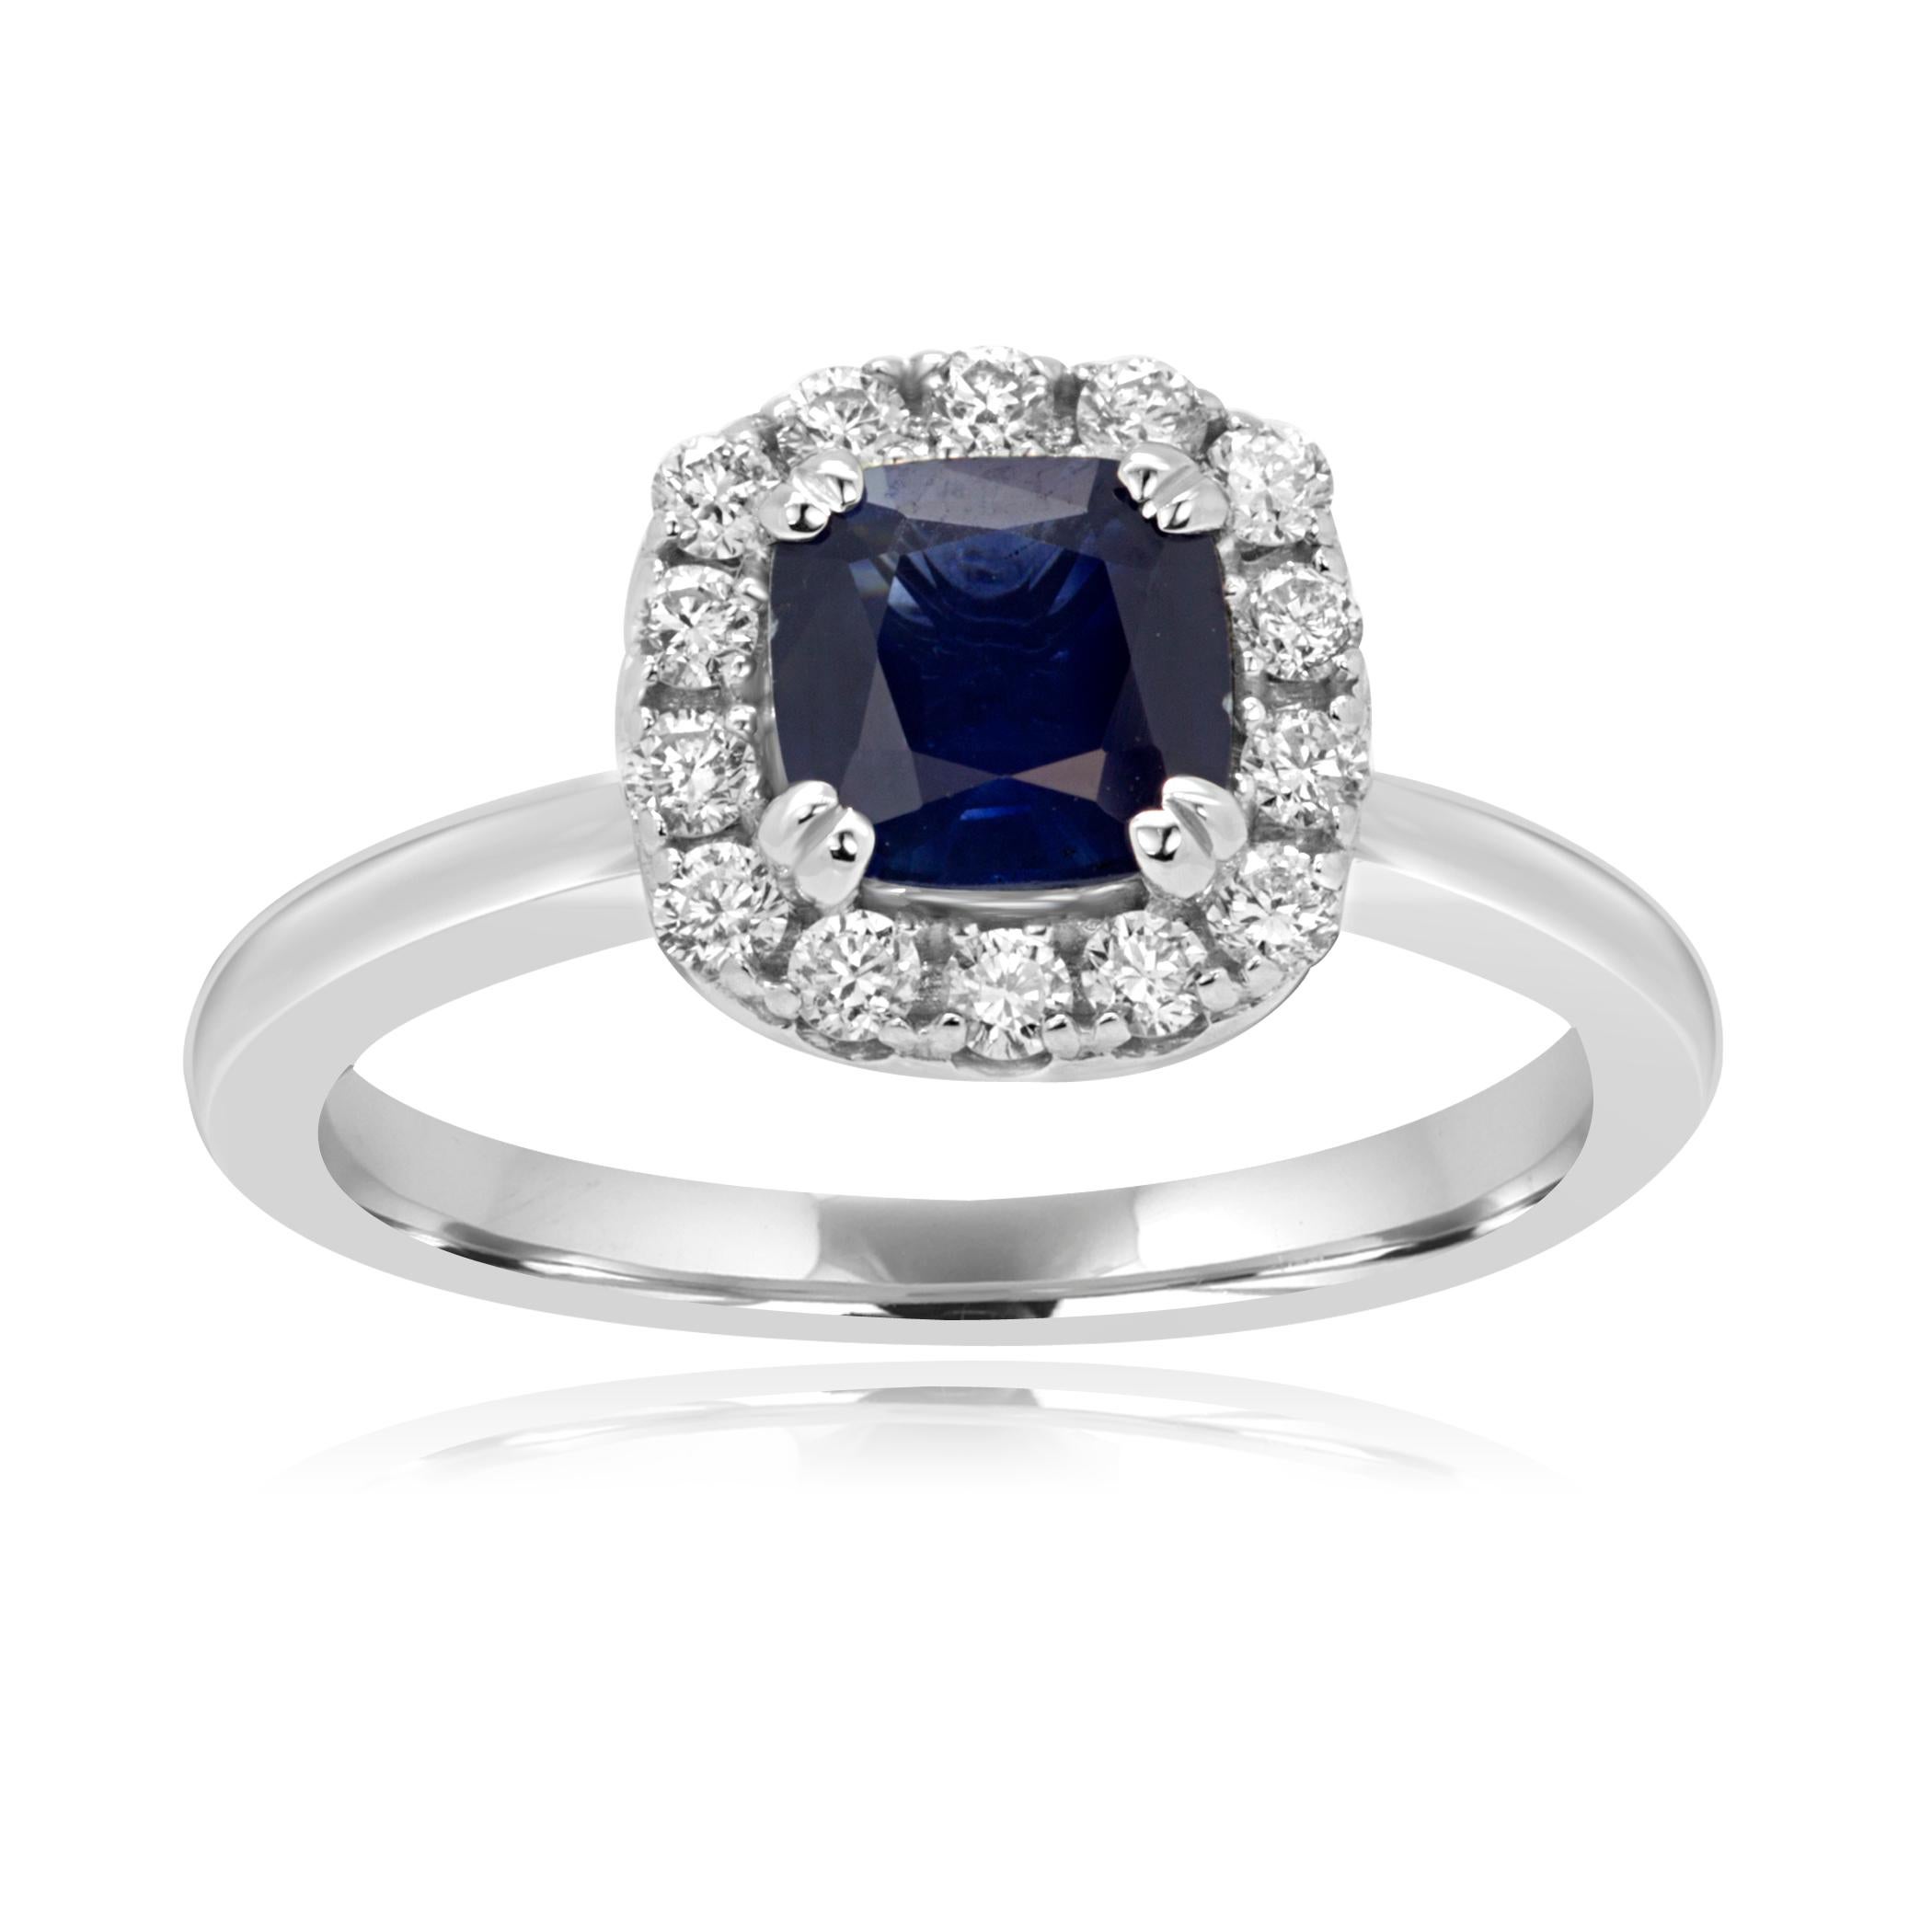 Blue Sapphire Cushion 1.12 Carat encircled in Single Row Halo of White Round Diamond 0.35 Carat in 14K White Gold Classic always in style Halo Bridal Fashion Cocktail Ring,

Style available in different price ranges. Prices are based on your